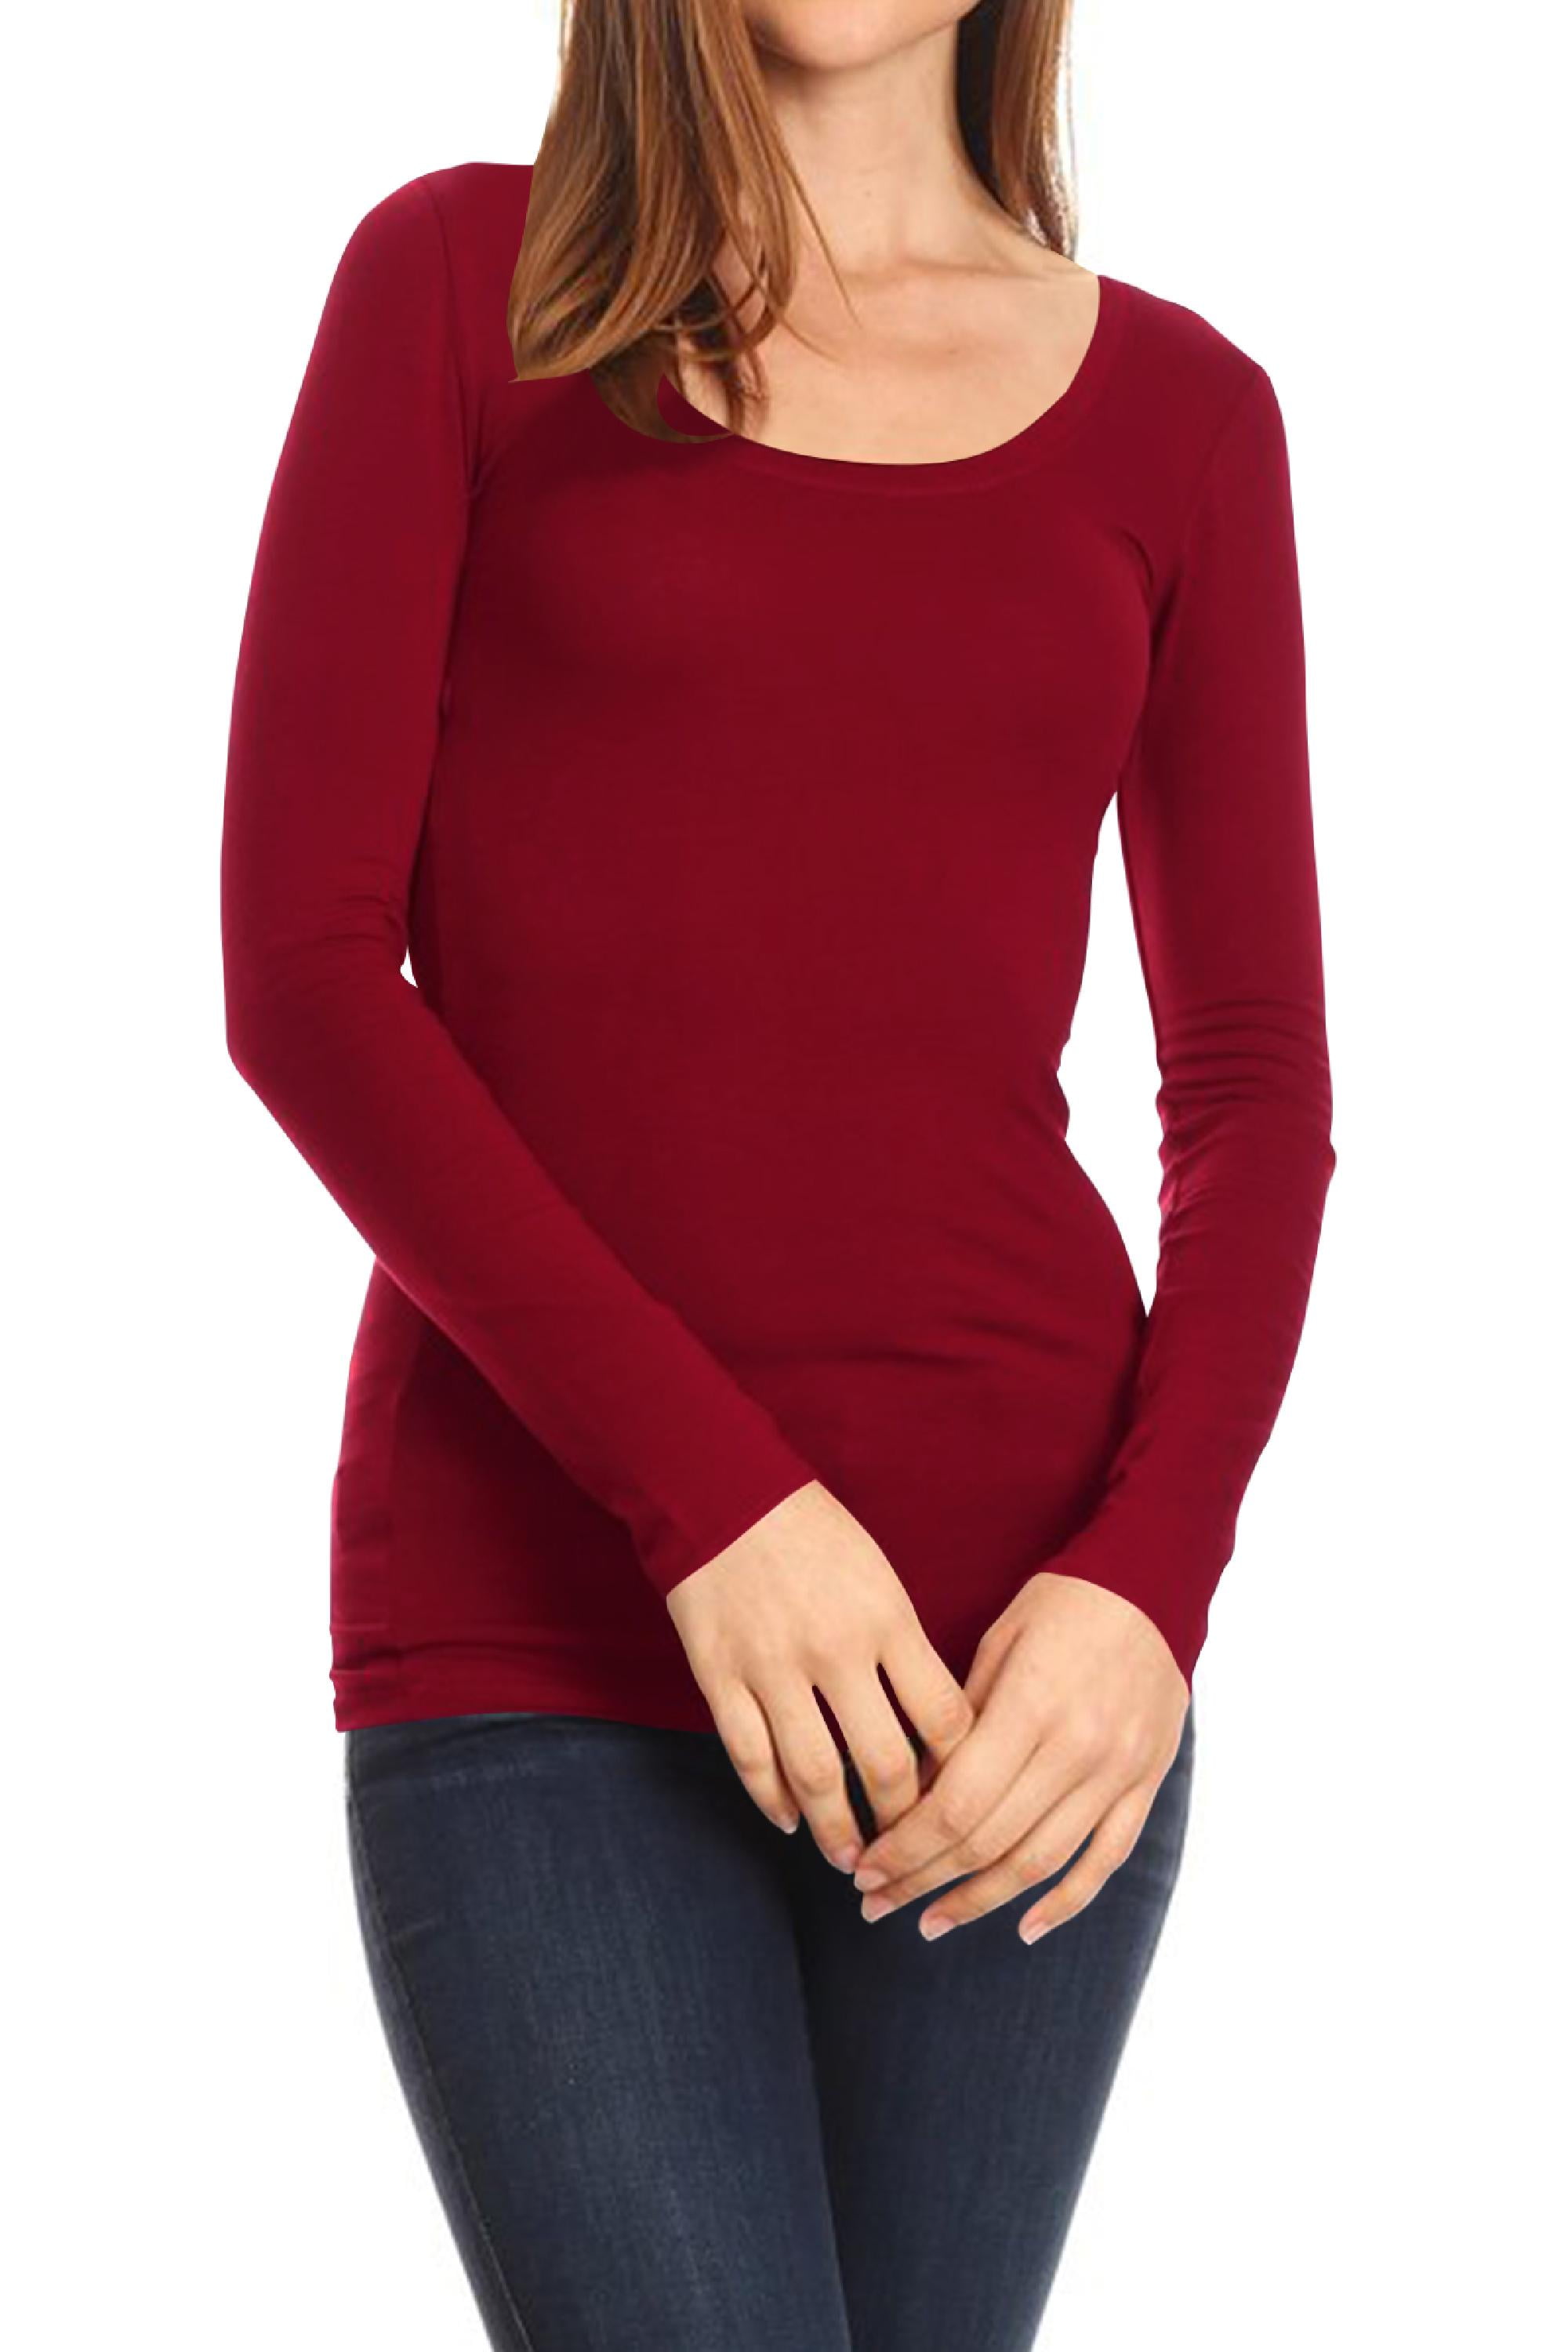 Women's Basic Stretch Pull On Casual Long Sleeve Scoop Neck Fitted ...